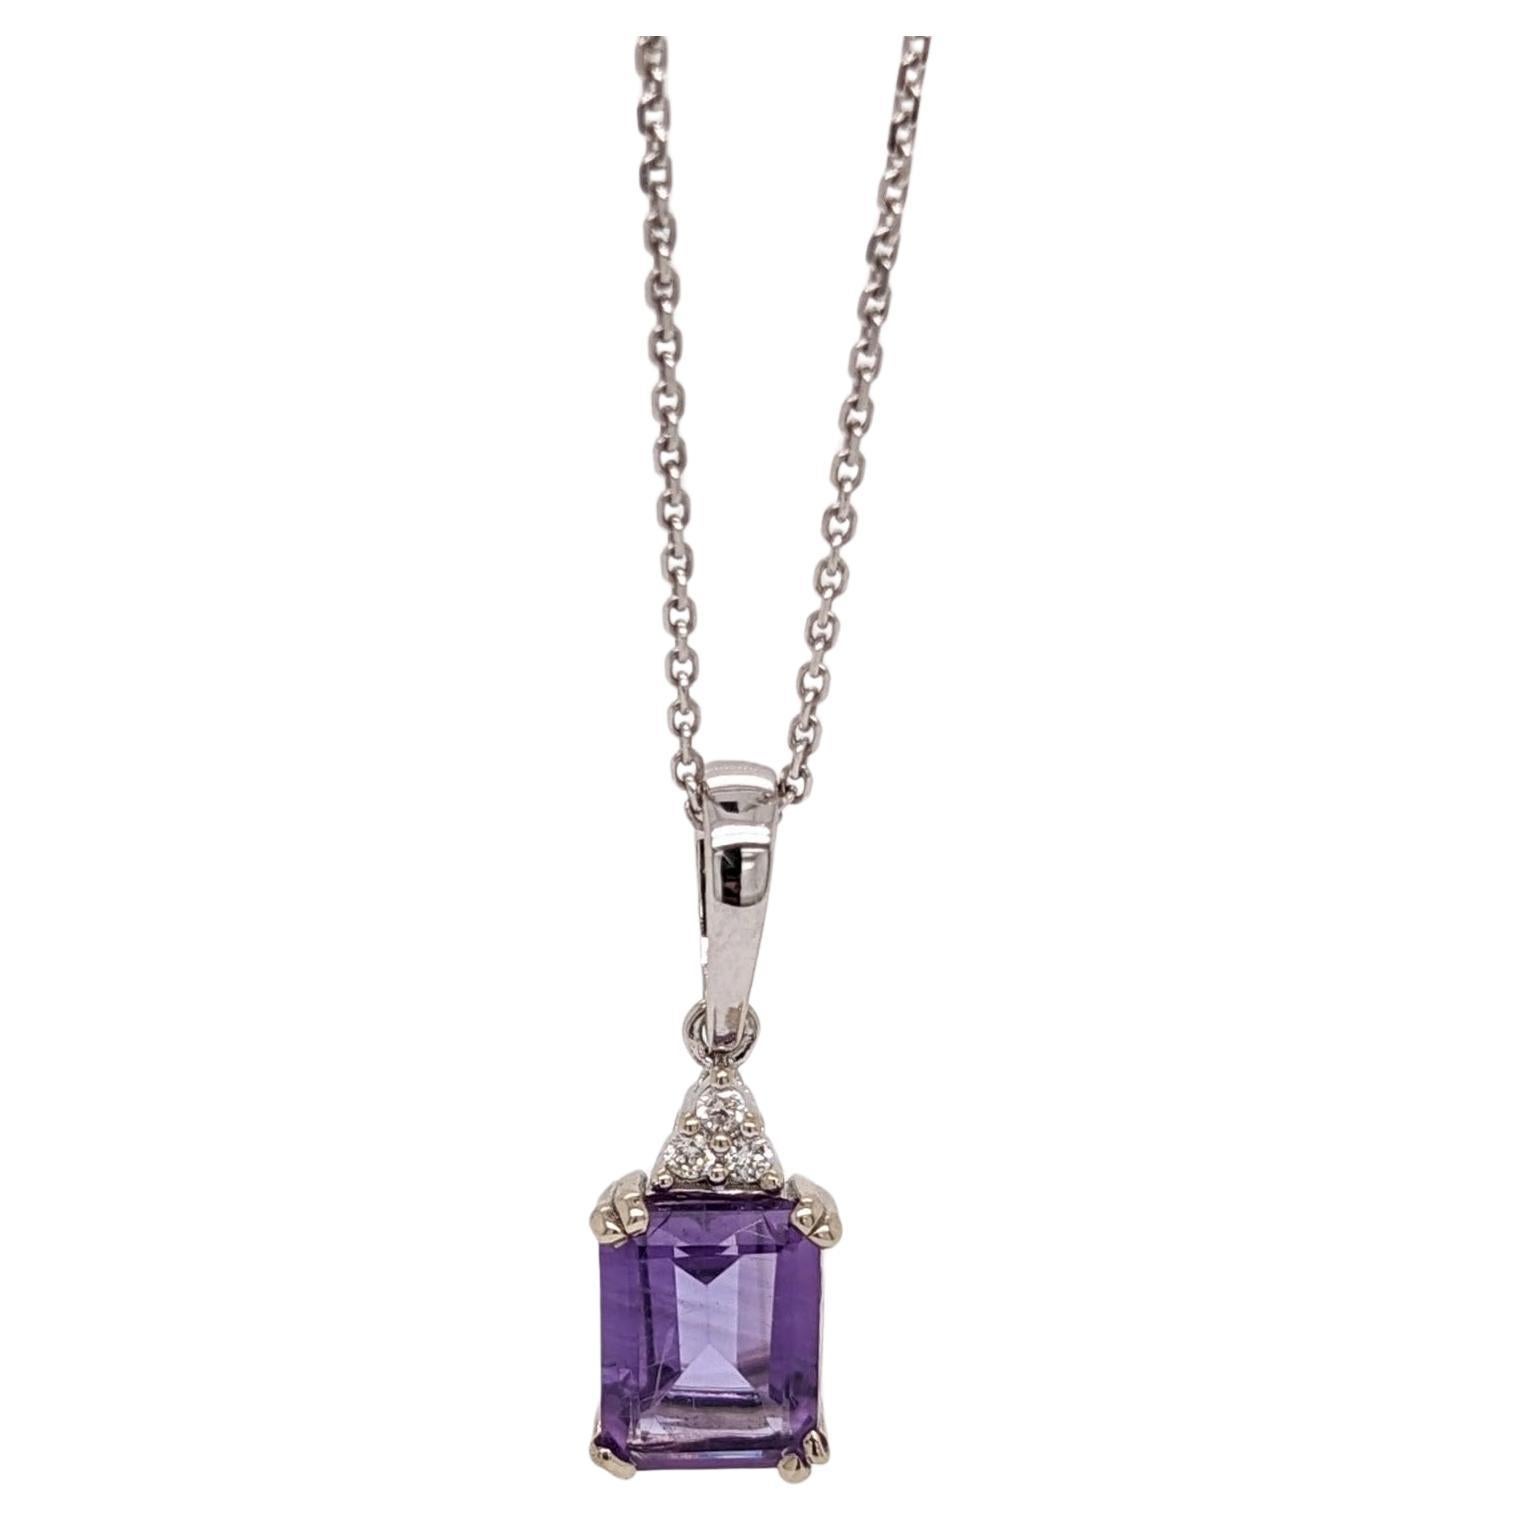 1.99ct Amethyst Pendant w Diamond Accents in Solid 14K White Gold Oval 8x6mm